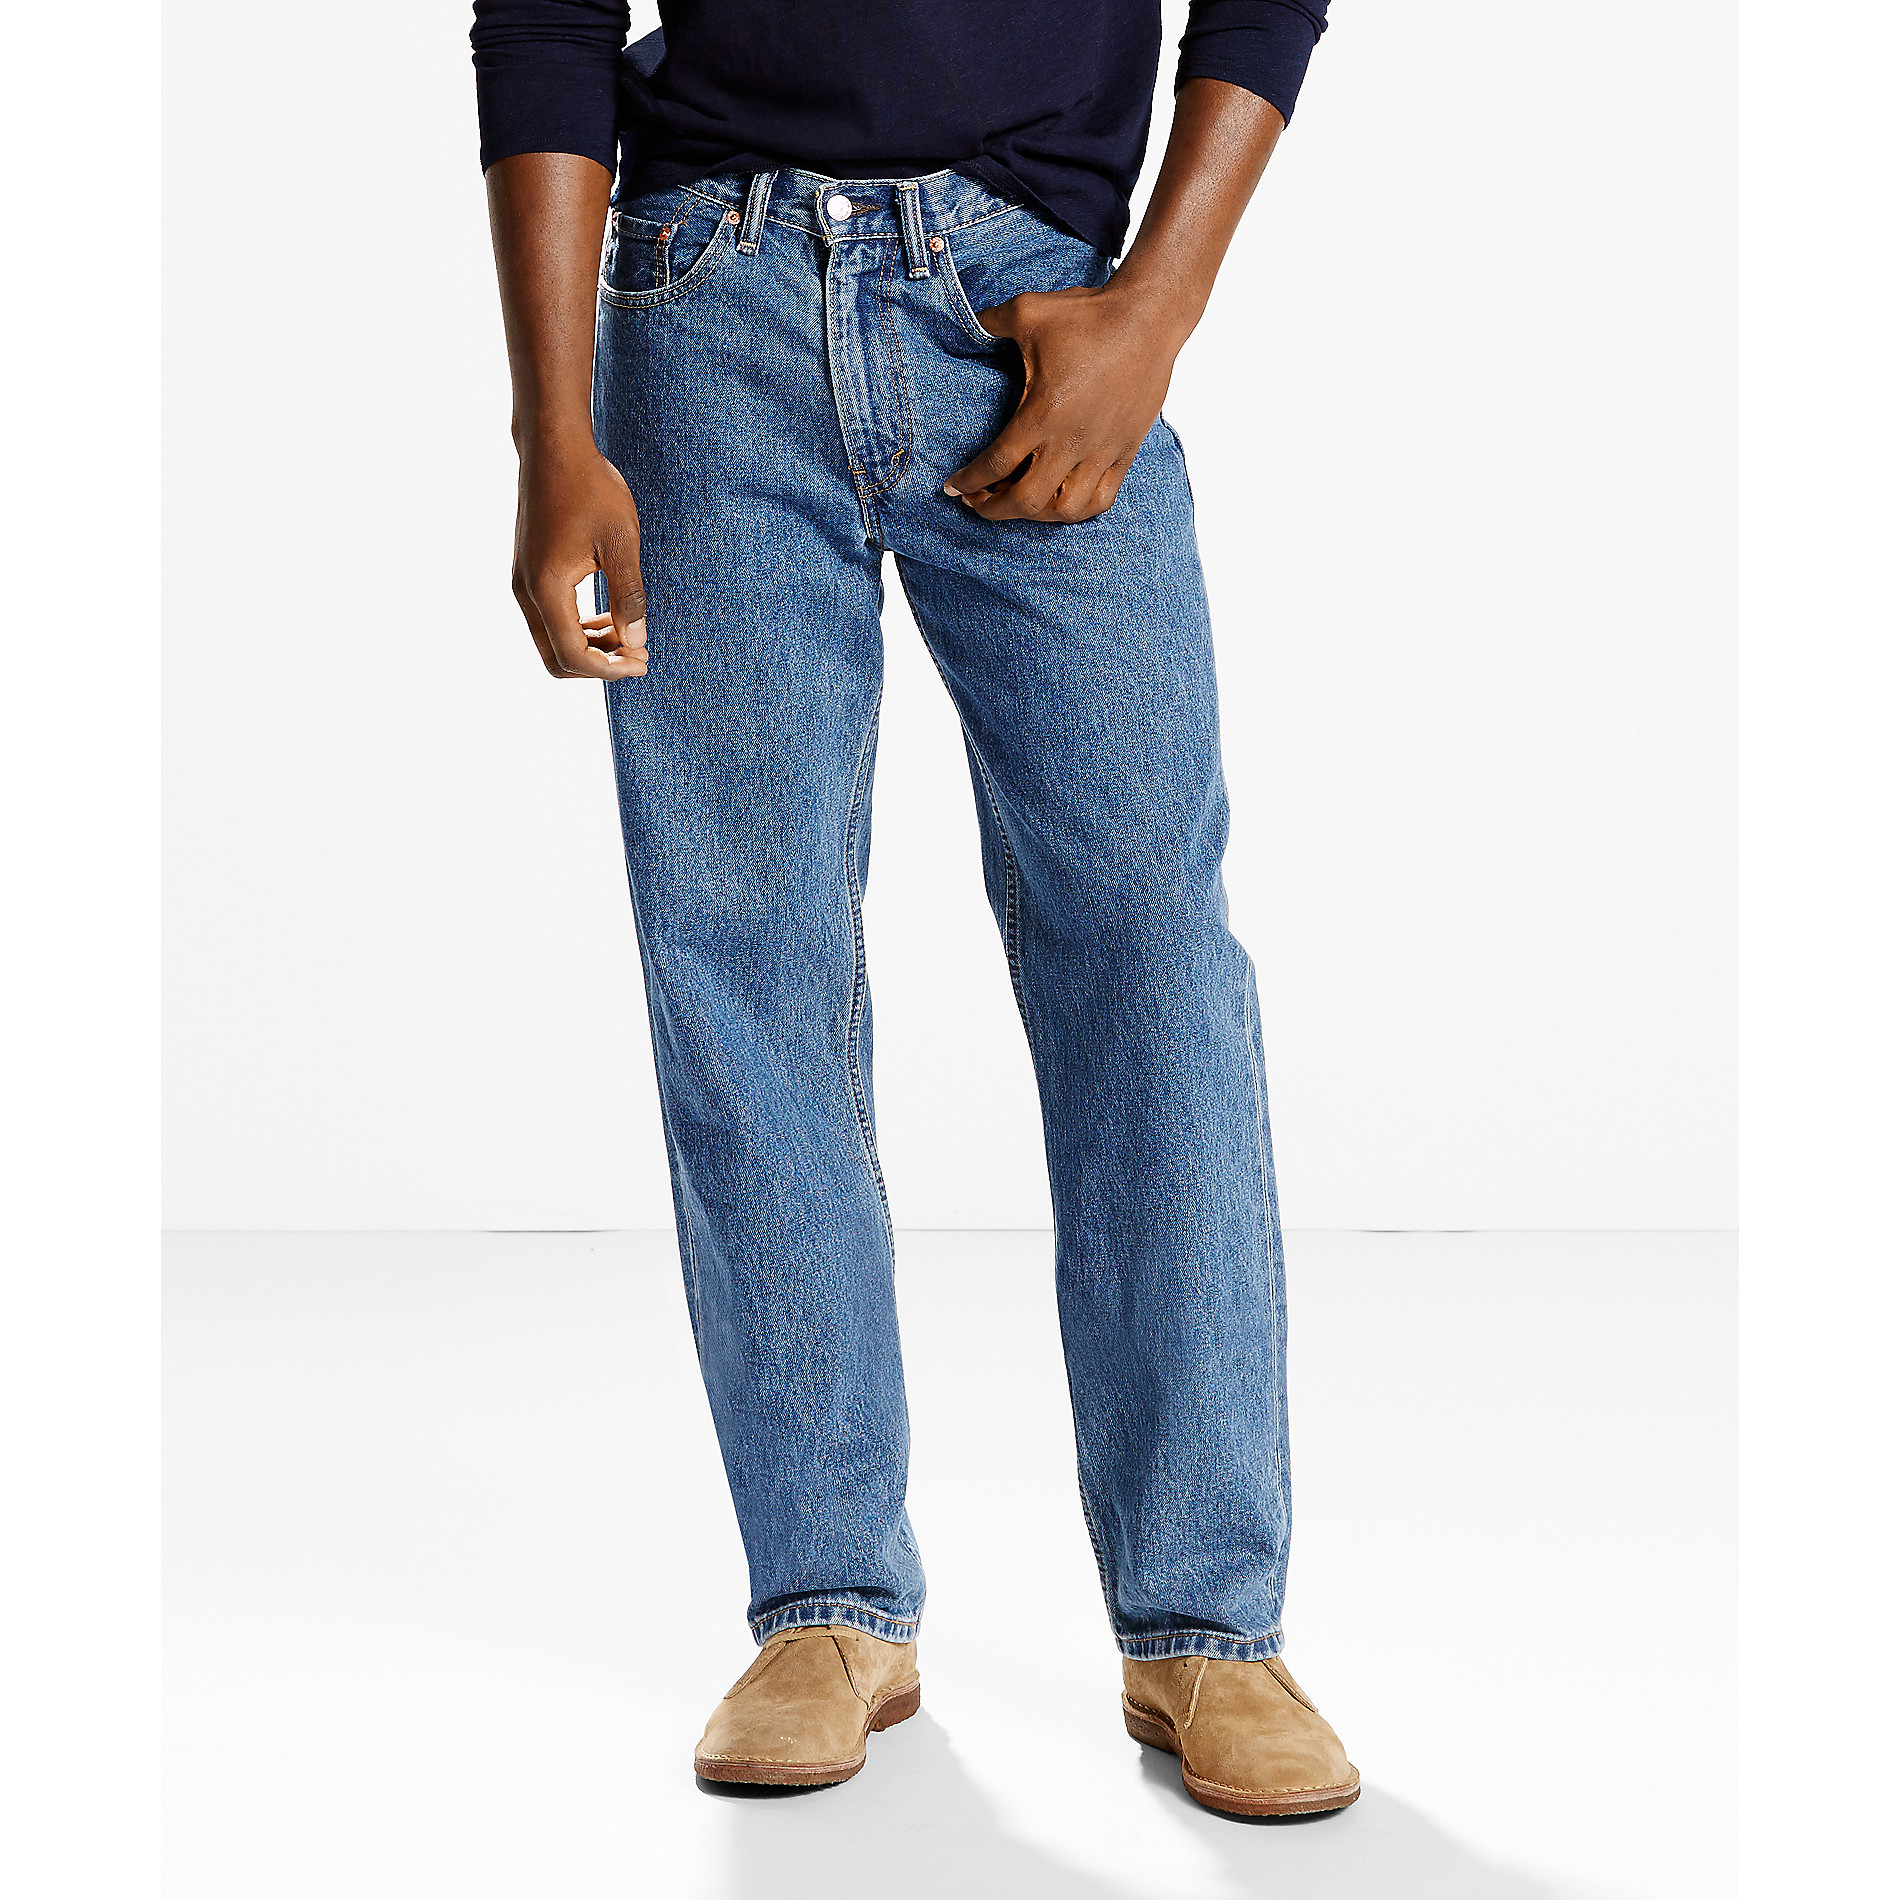 levis 550 mens jeans big and tall